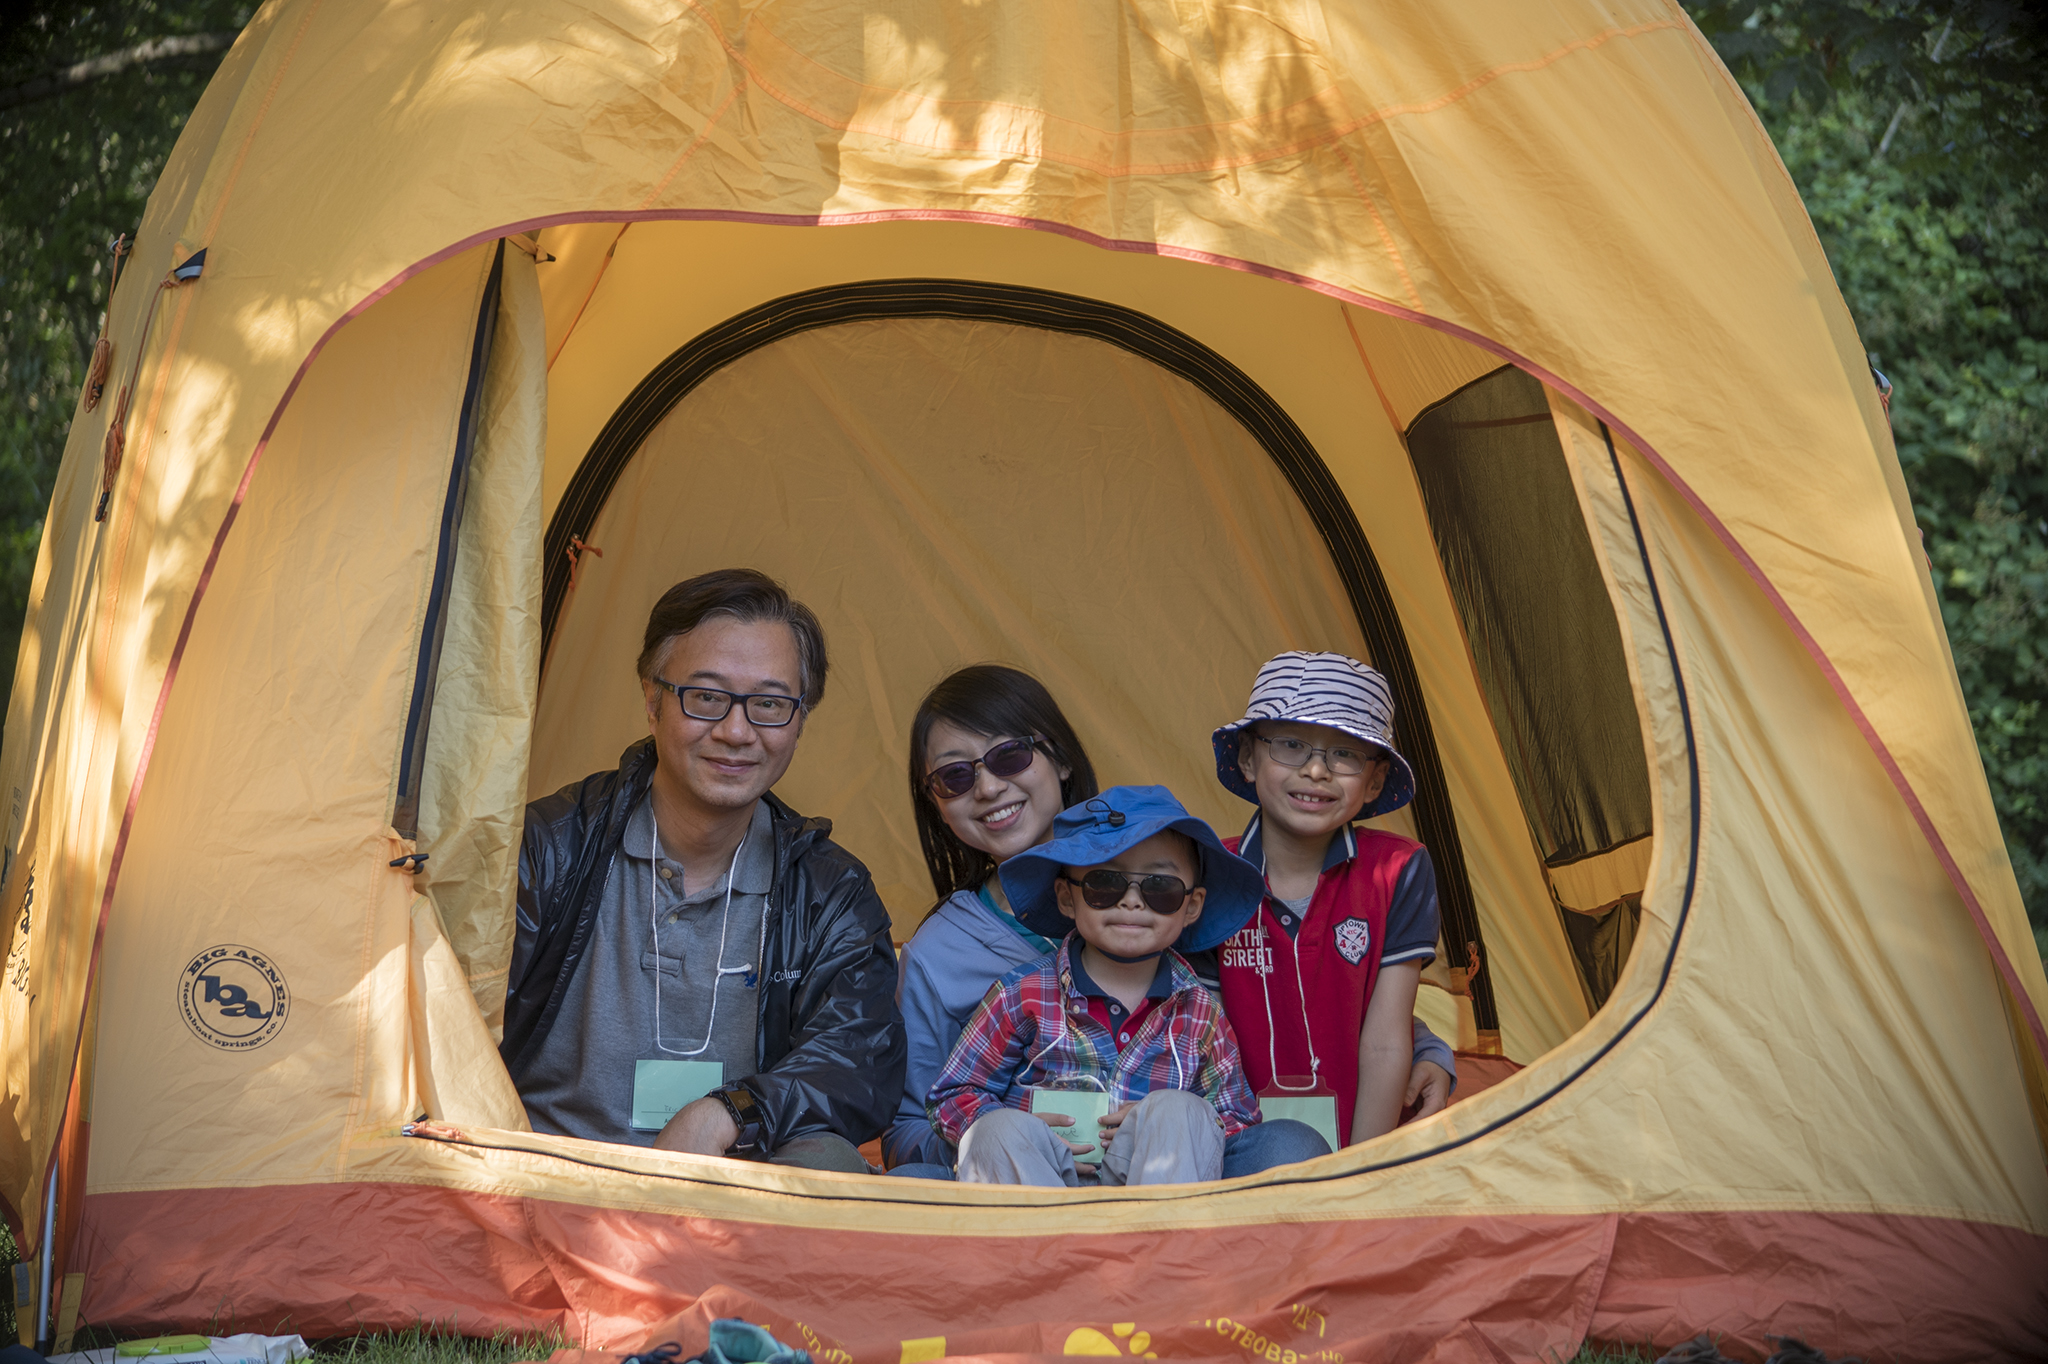 Family of 4 sit in a yellow tent